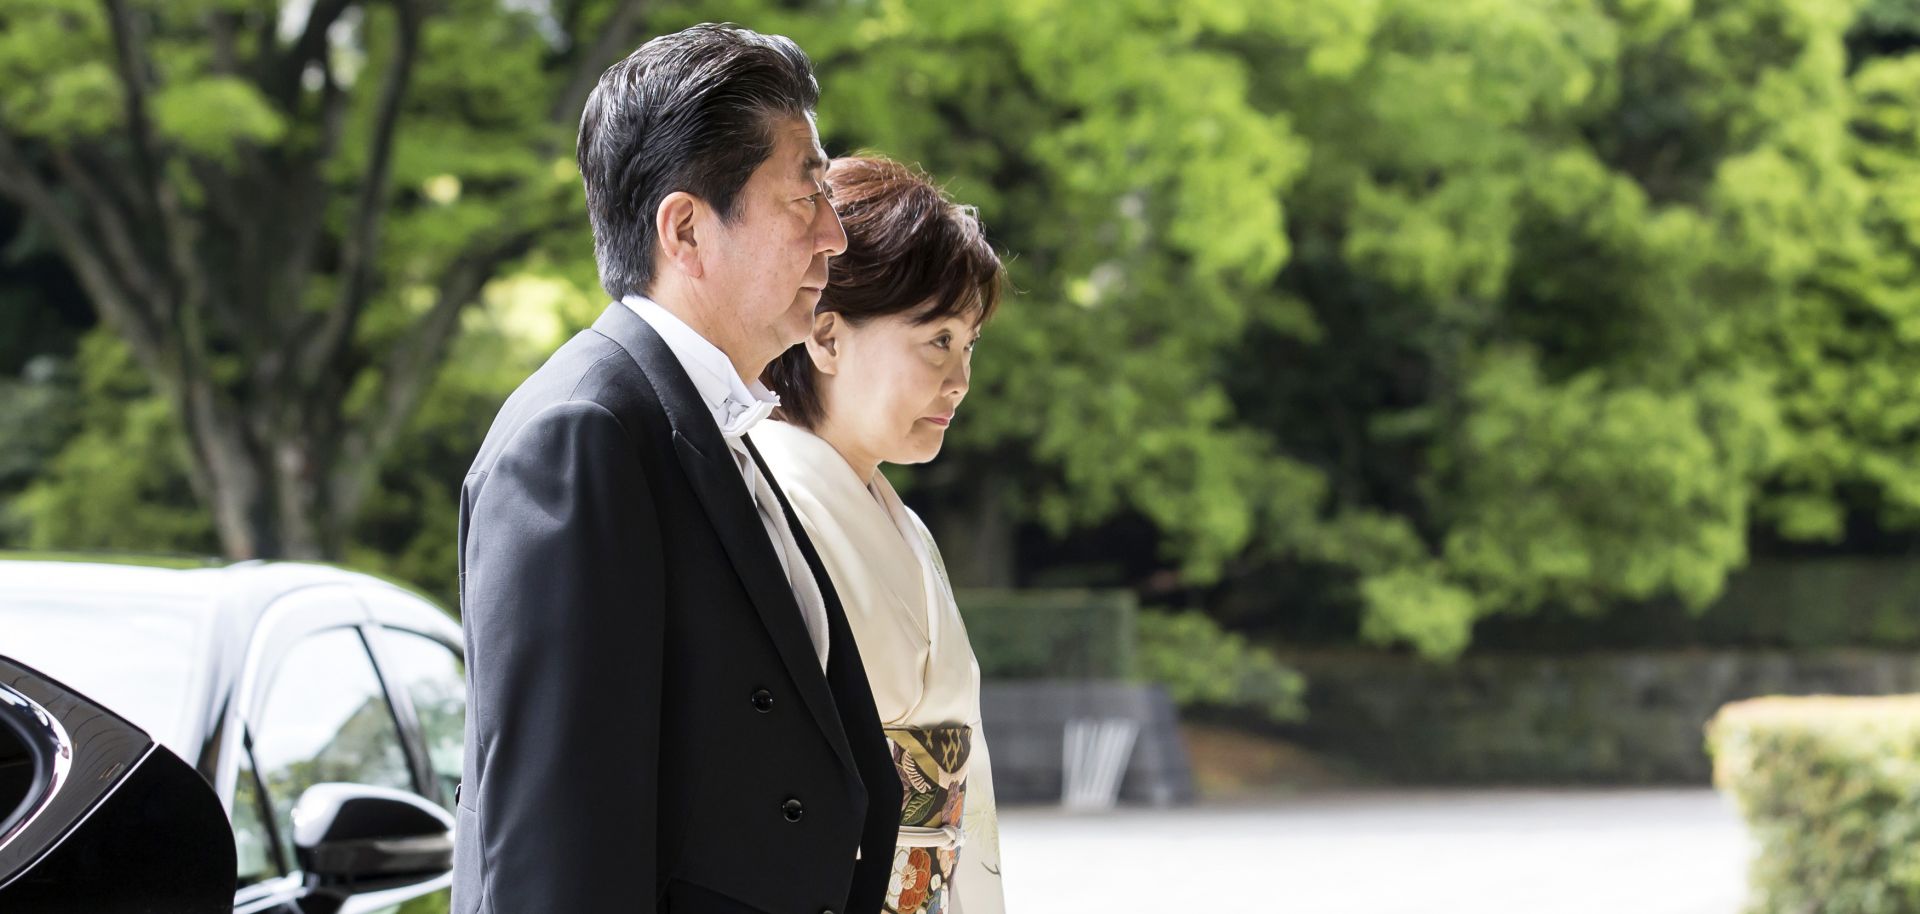 This photo shows Japanese prime minister Shinzo Abe and his wife, Akie